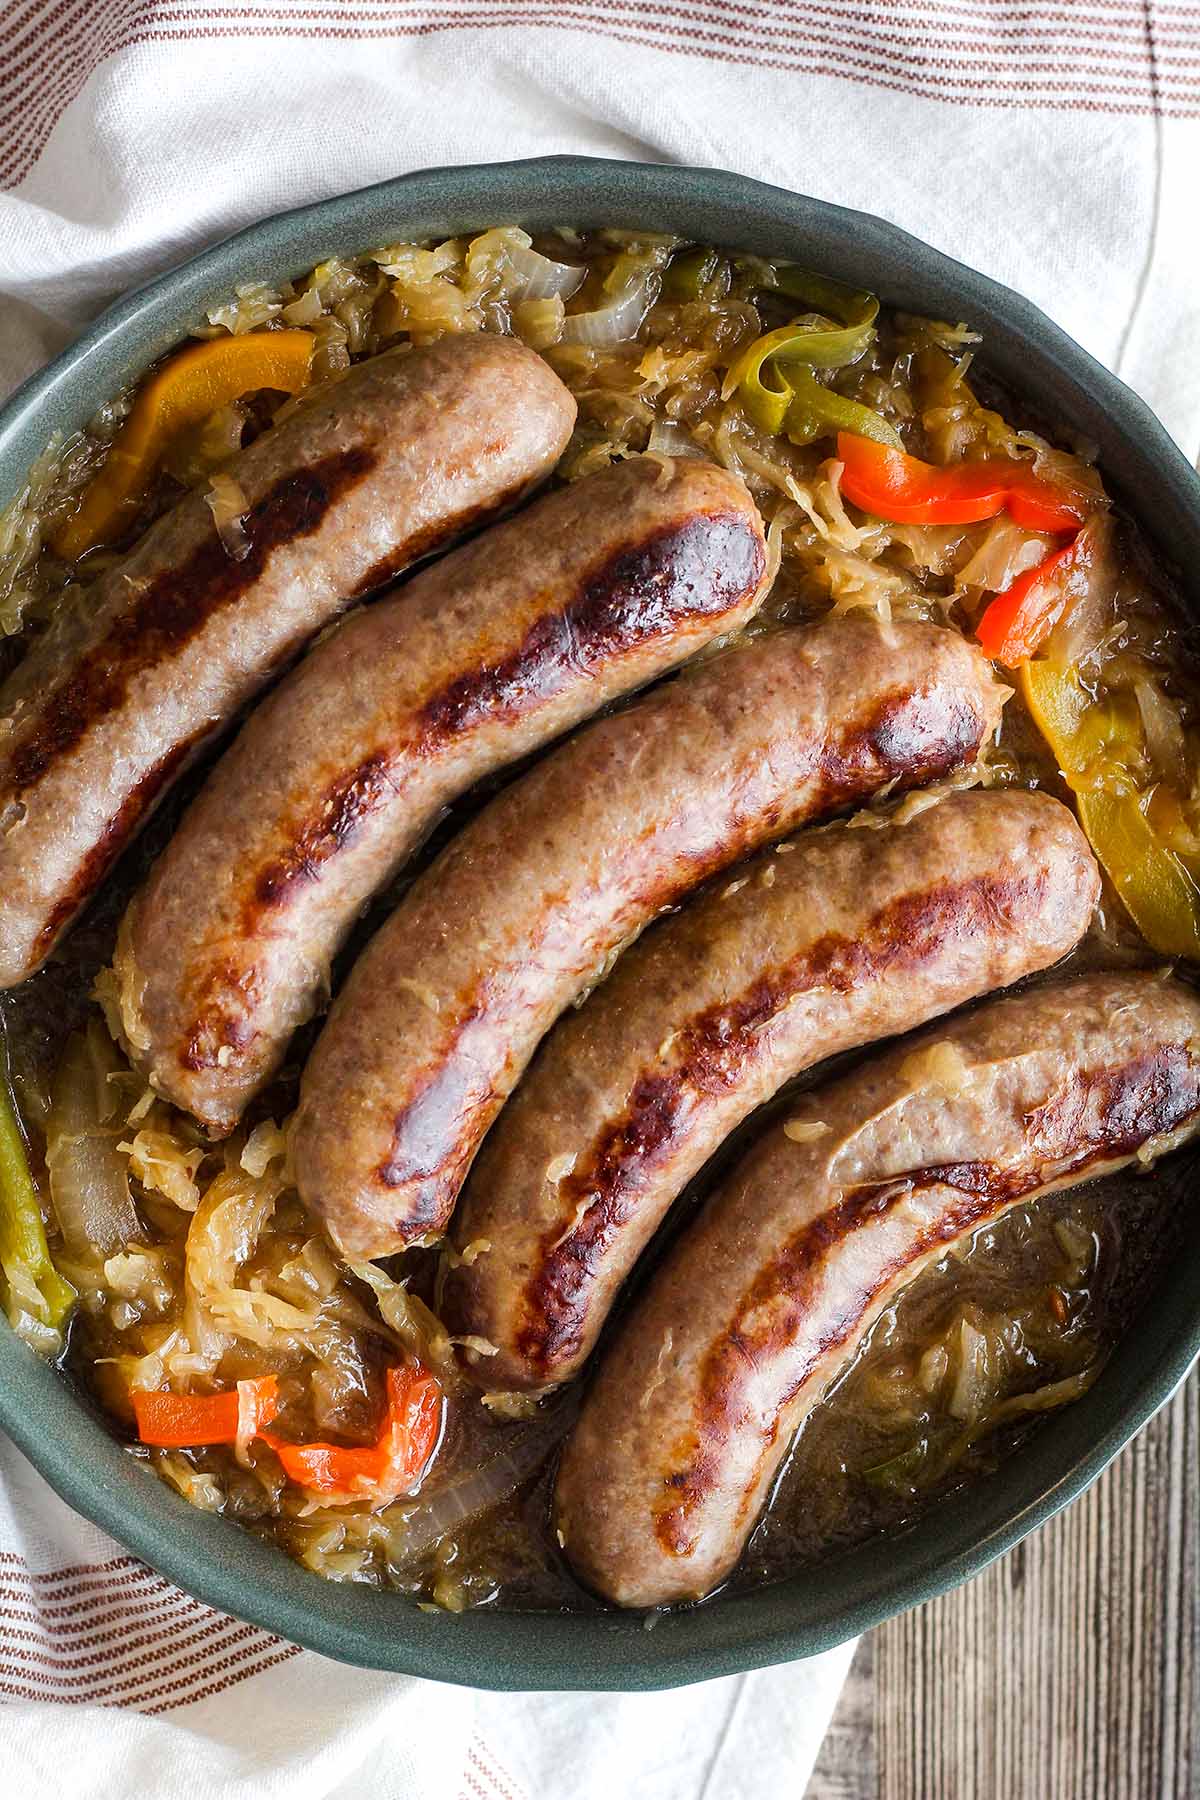 A bowl of brats with sauerkraut, peppers, and onions atop a kitchen towel.